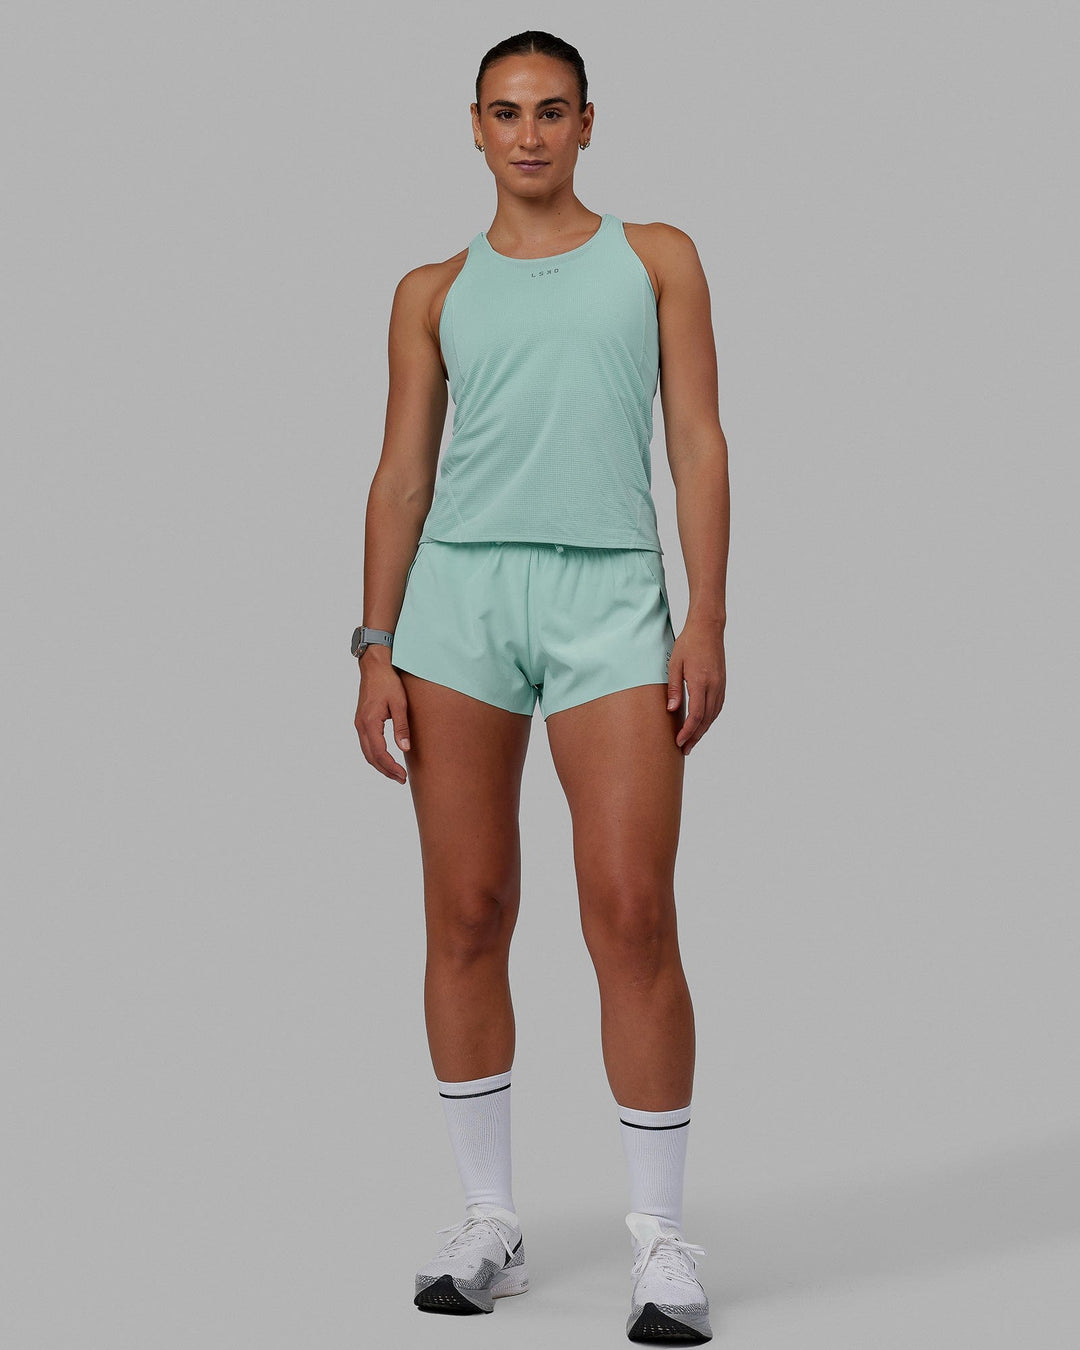 Accelerate Performance Tank - Pastel Turquoise